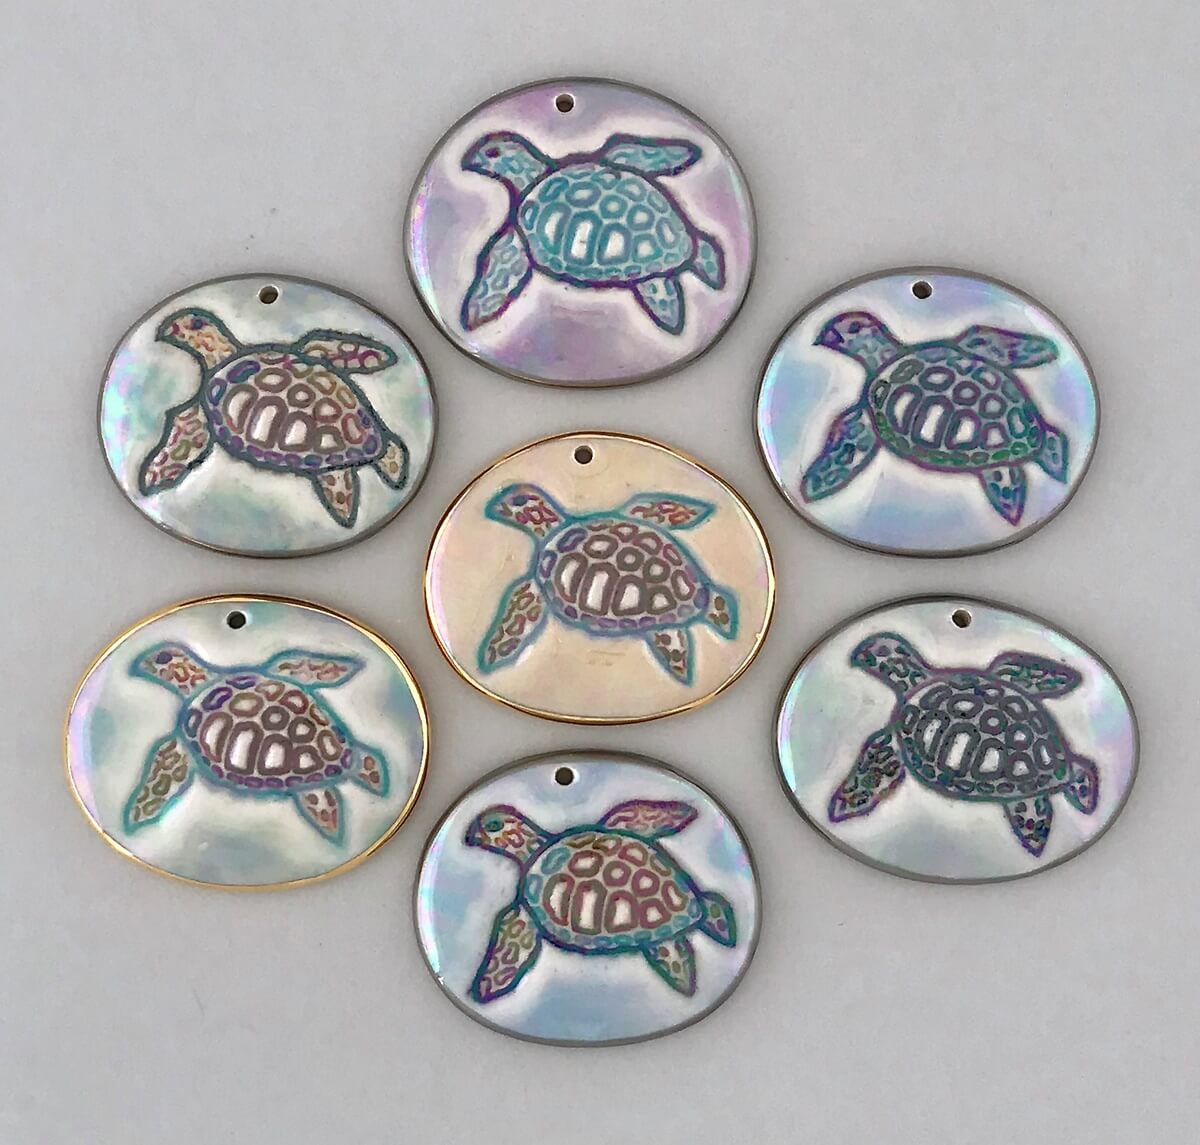 One of a kind sea turtle pendants, each one is individually handpainted.